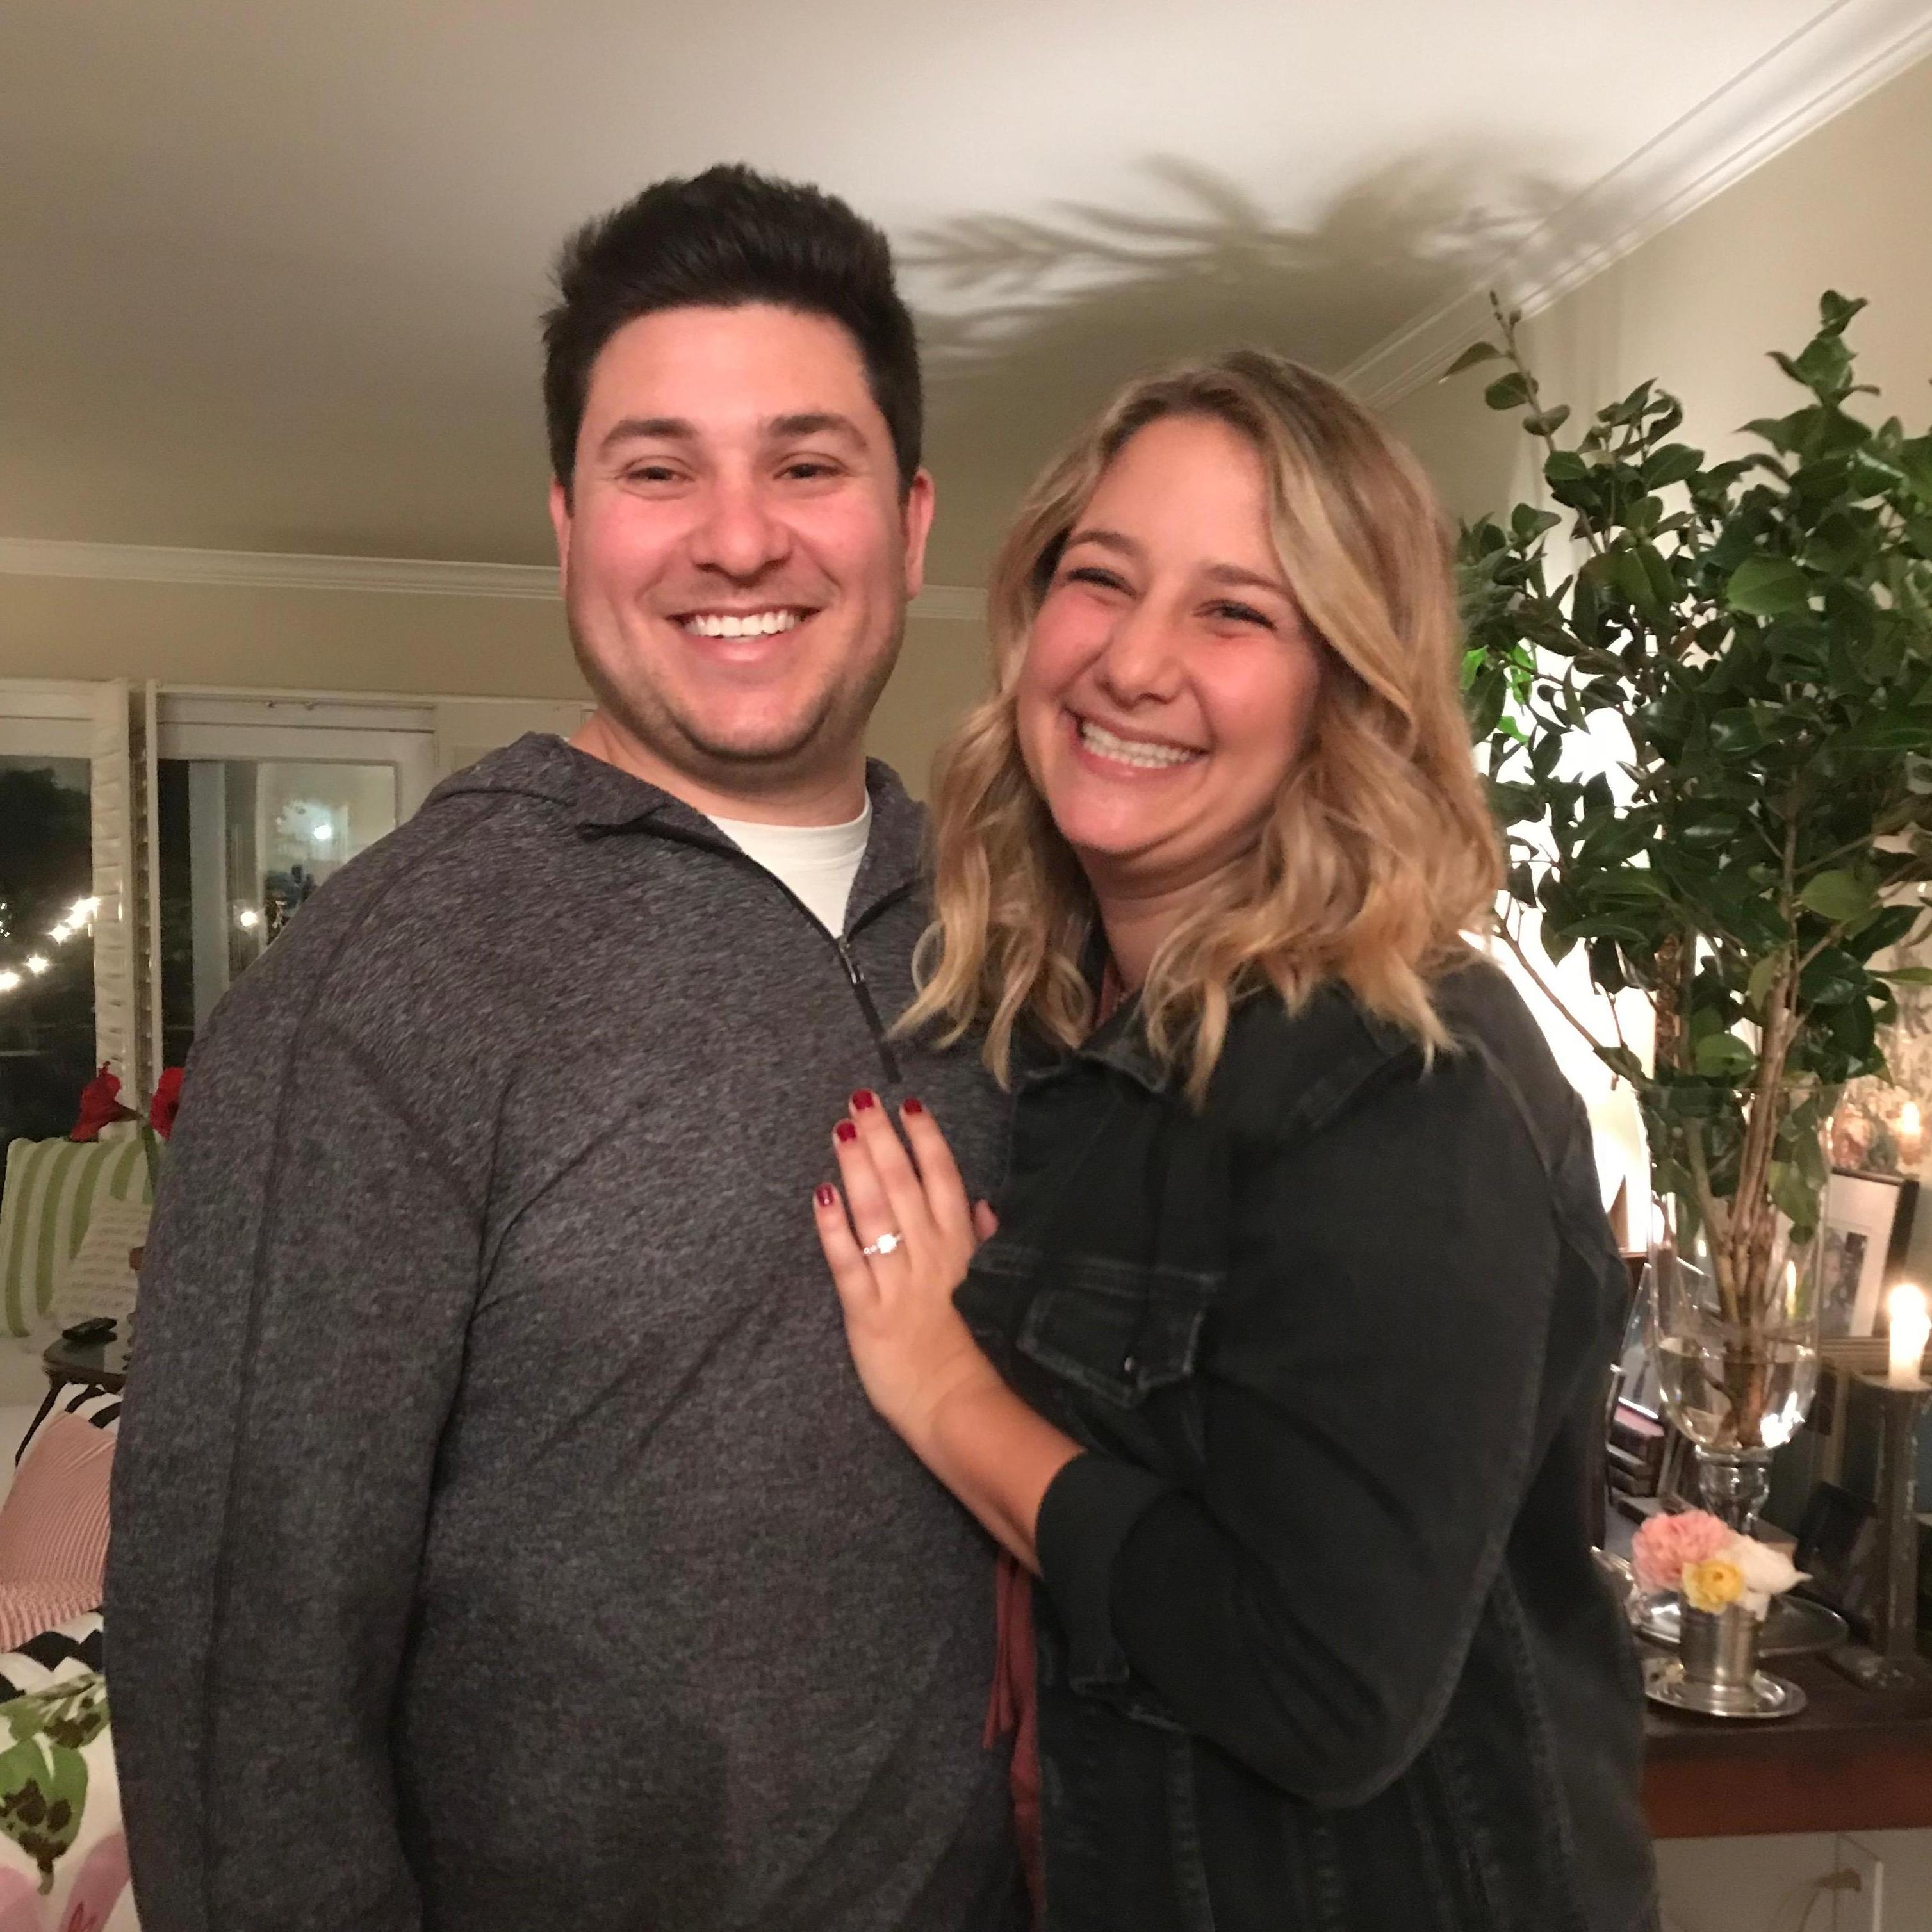 December 21, 2017 "I said, YES!"